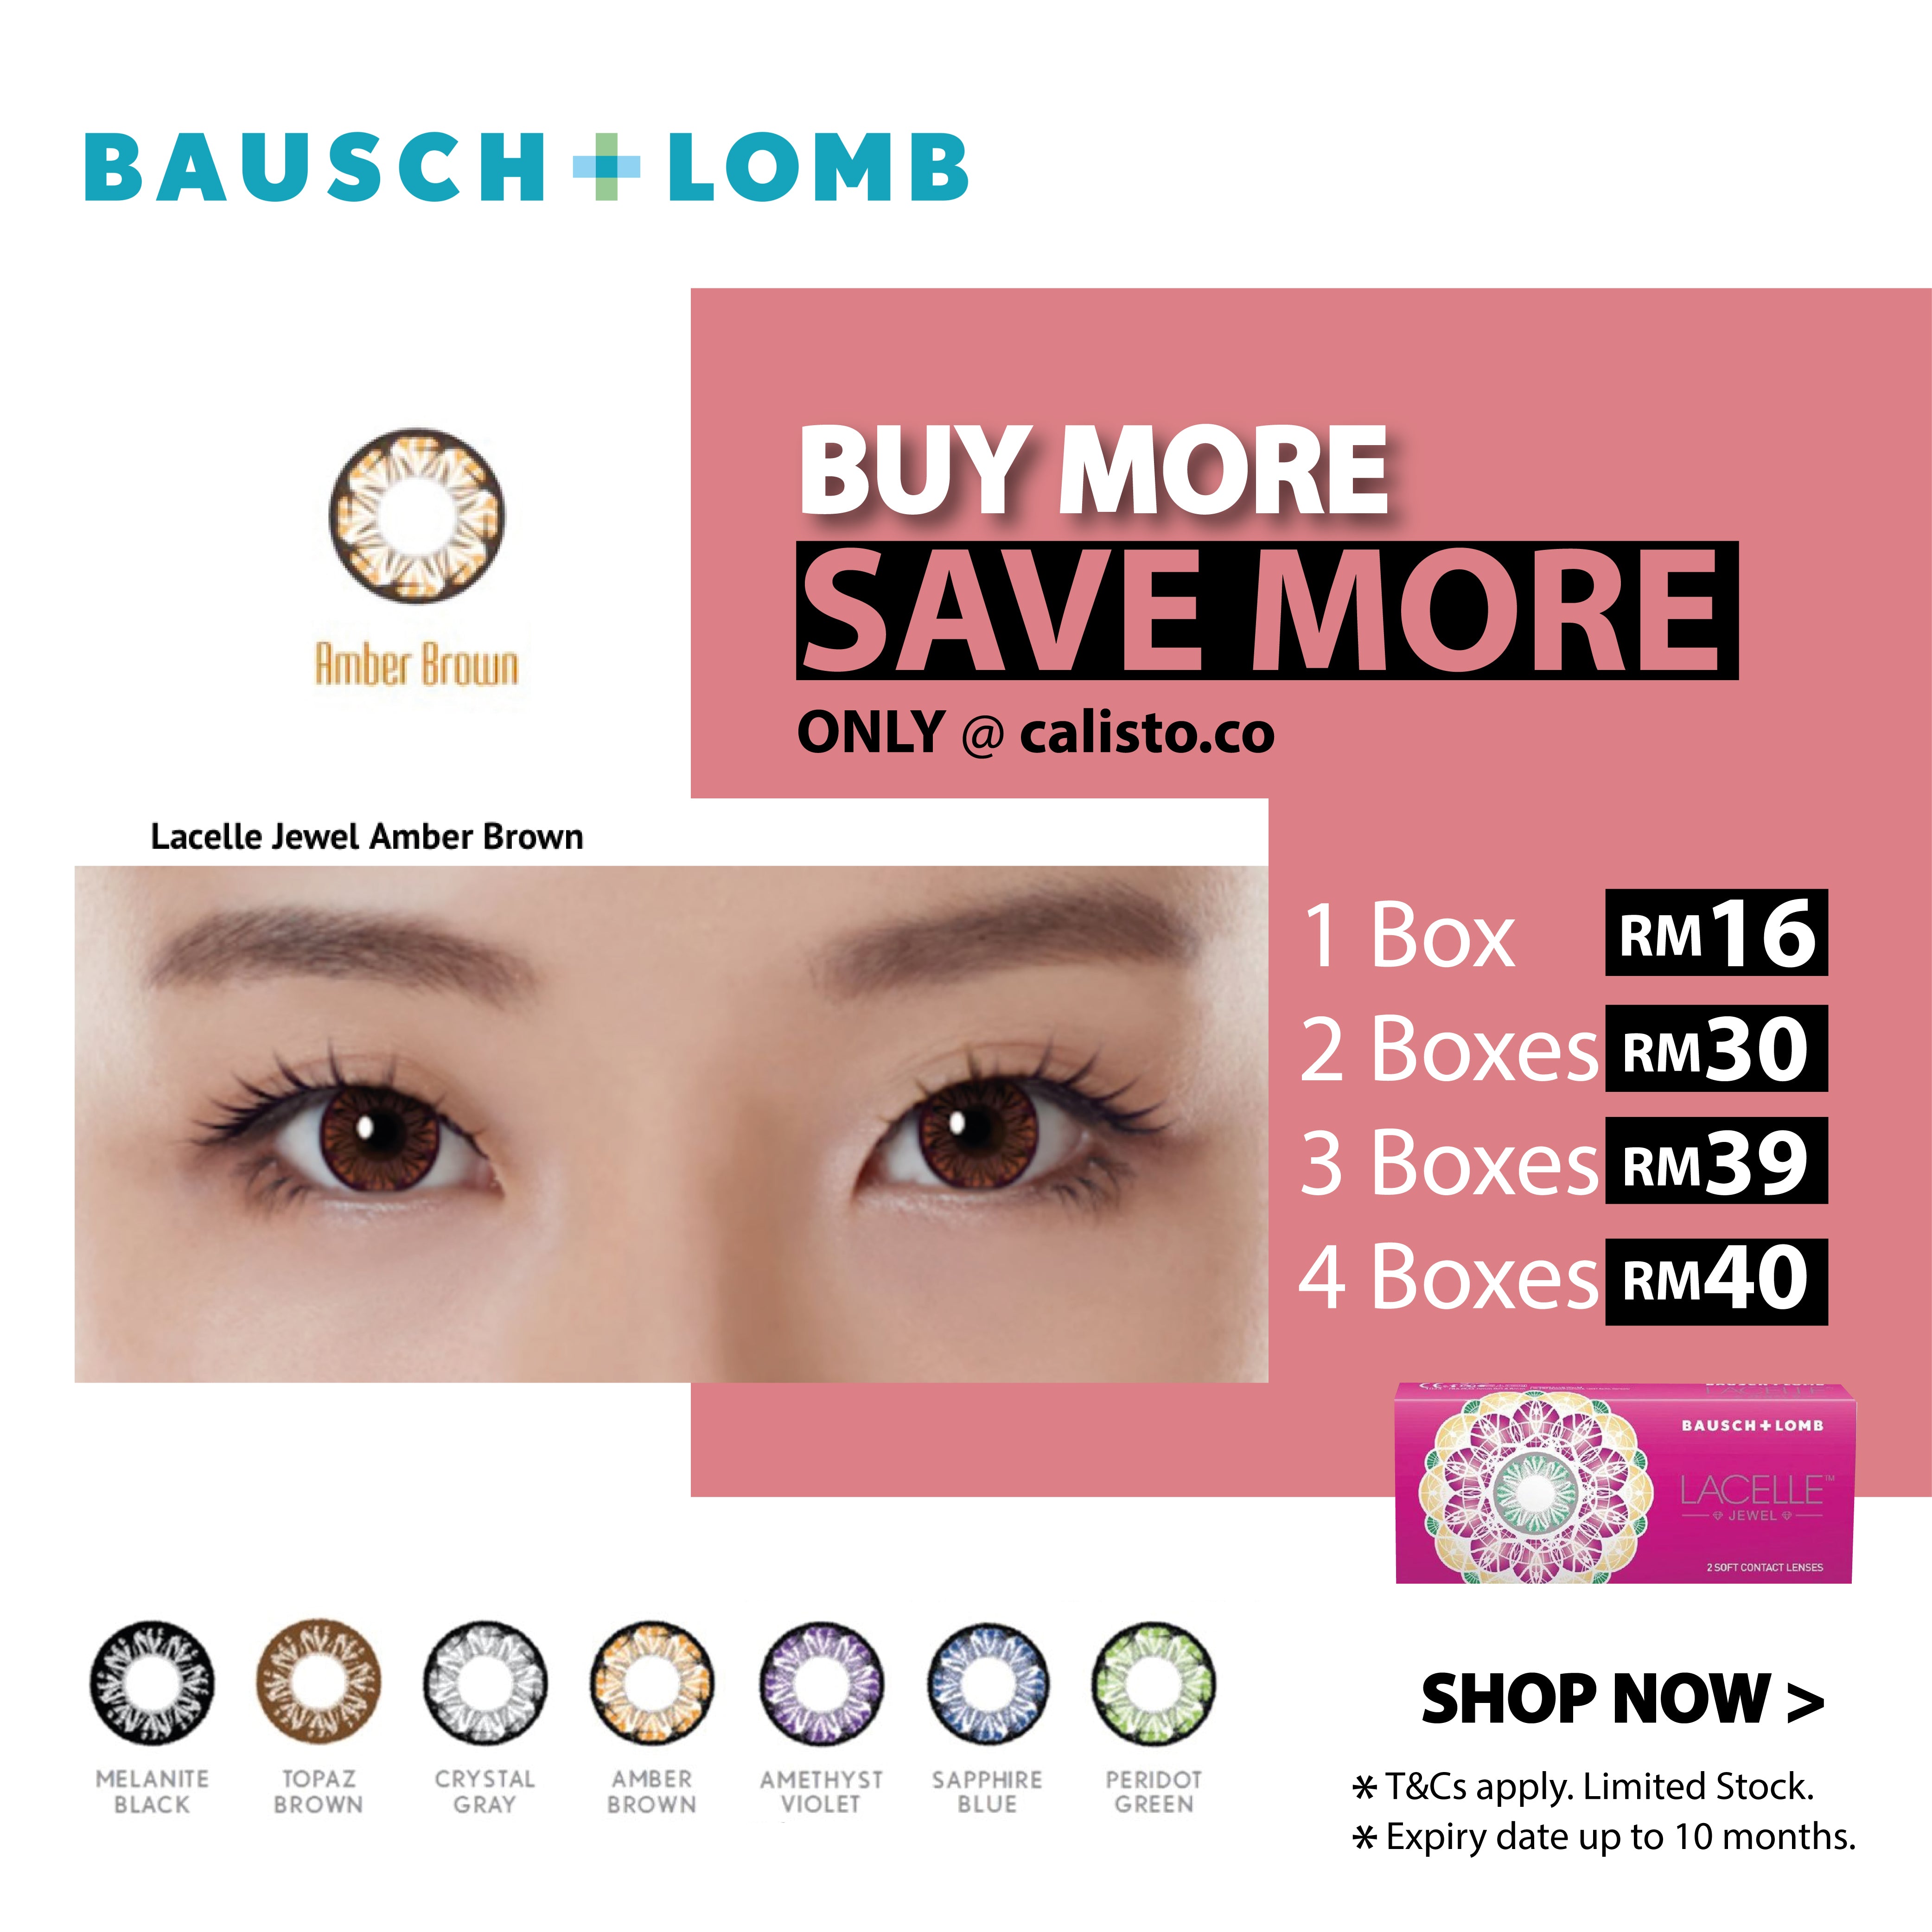 Bausch & Lomb Lacelle Jewel - Amber Brown (2 Pack)